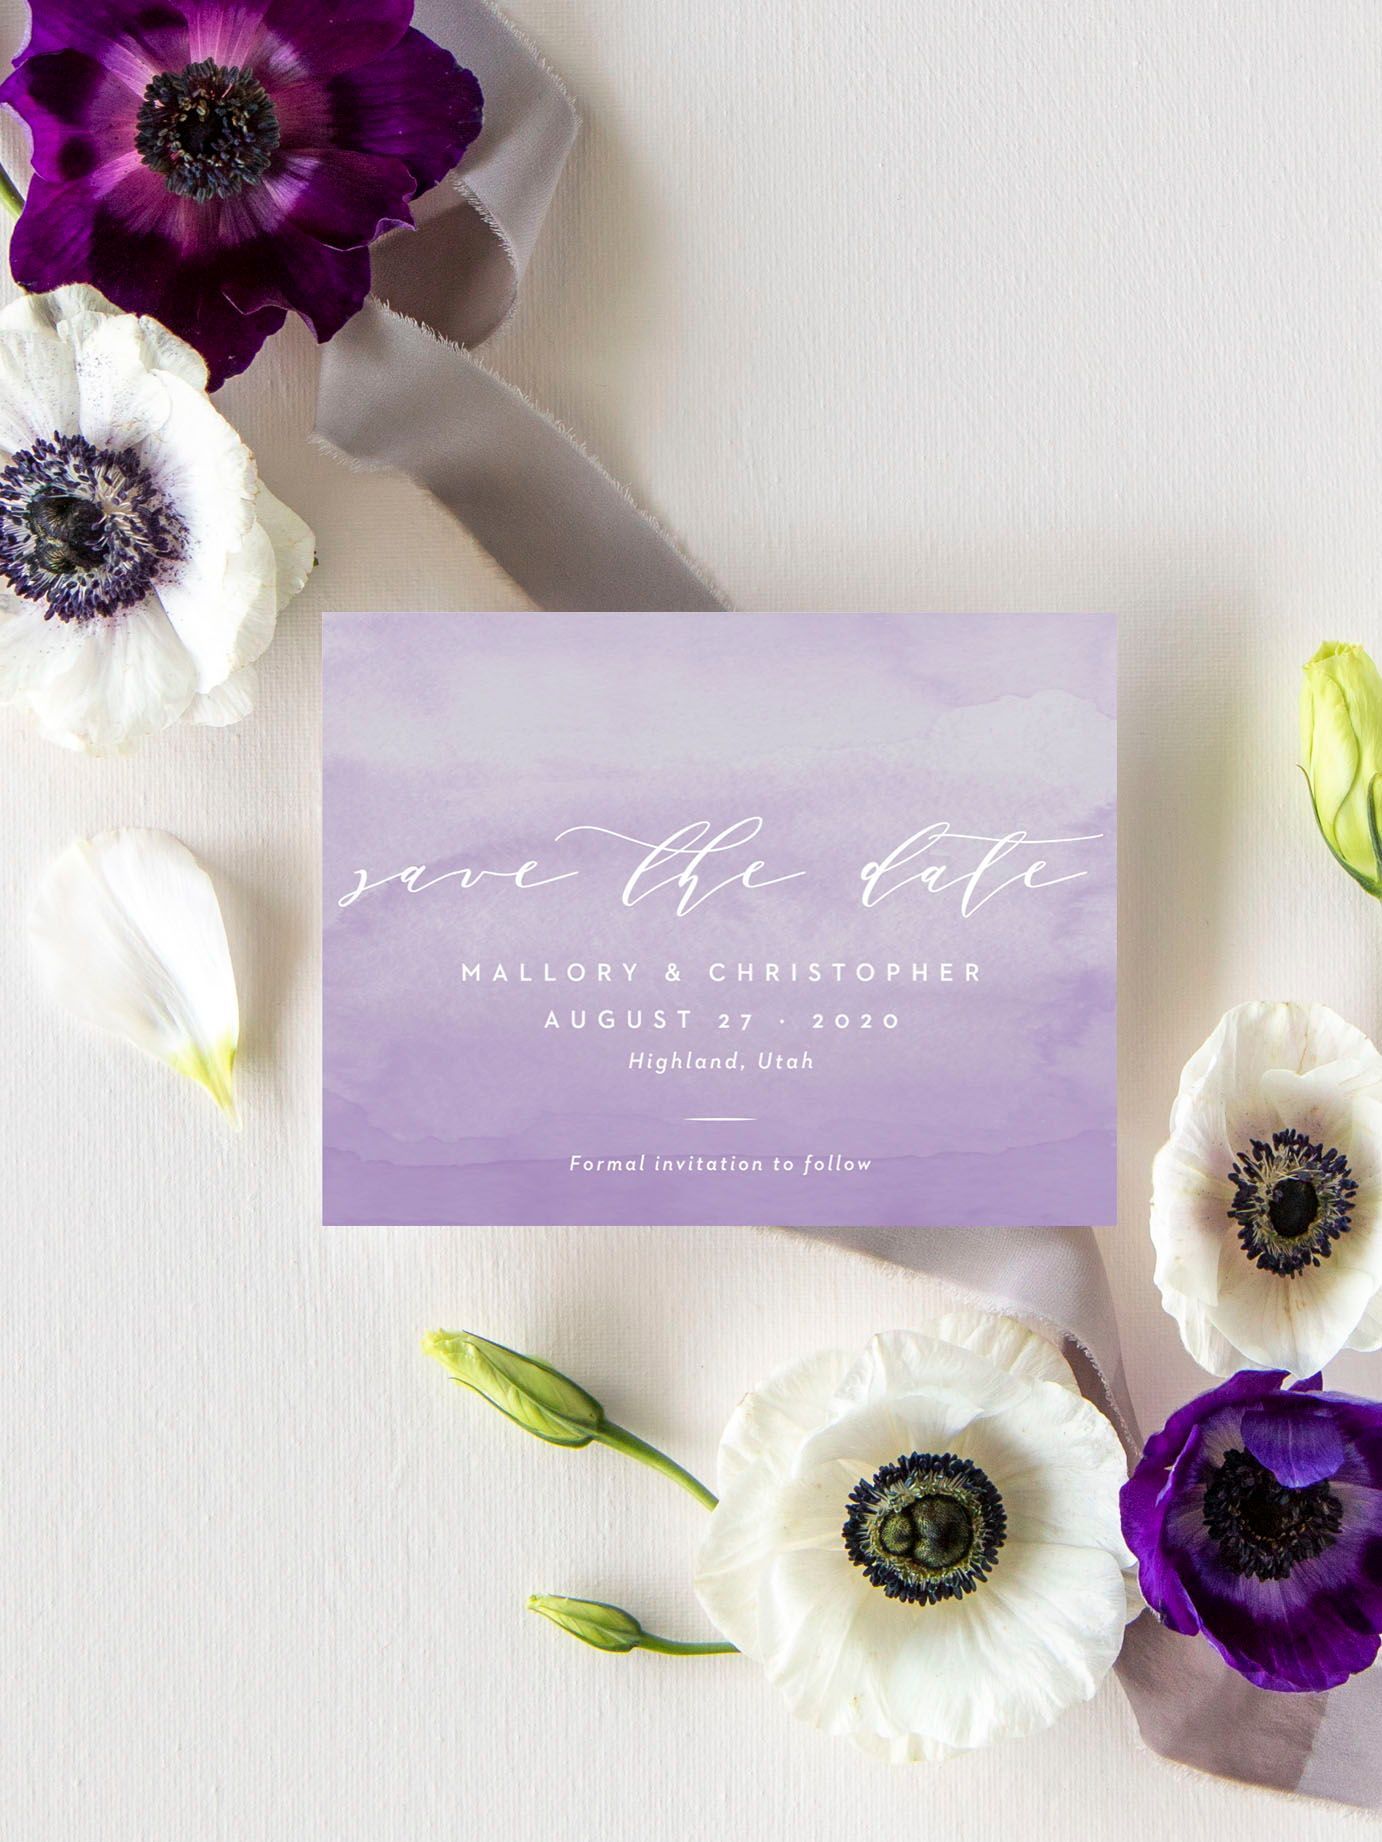 customizable lilac wedding invitations with florals made by basic invite